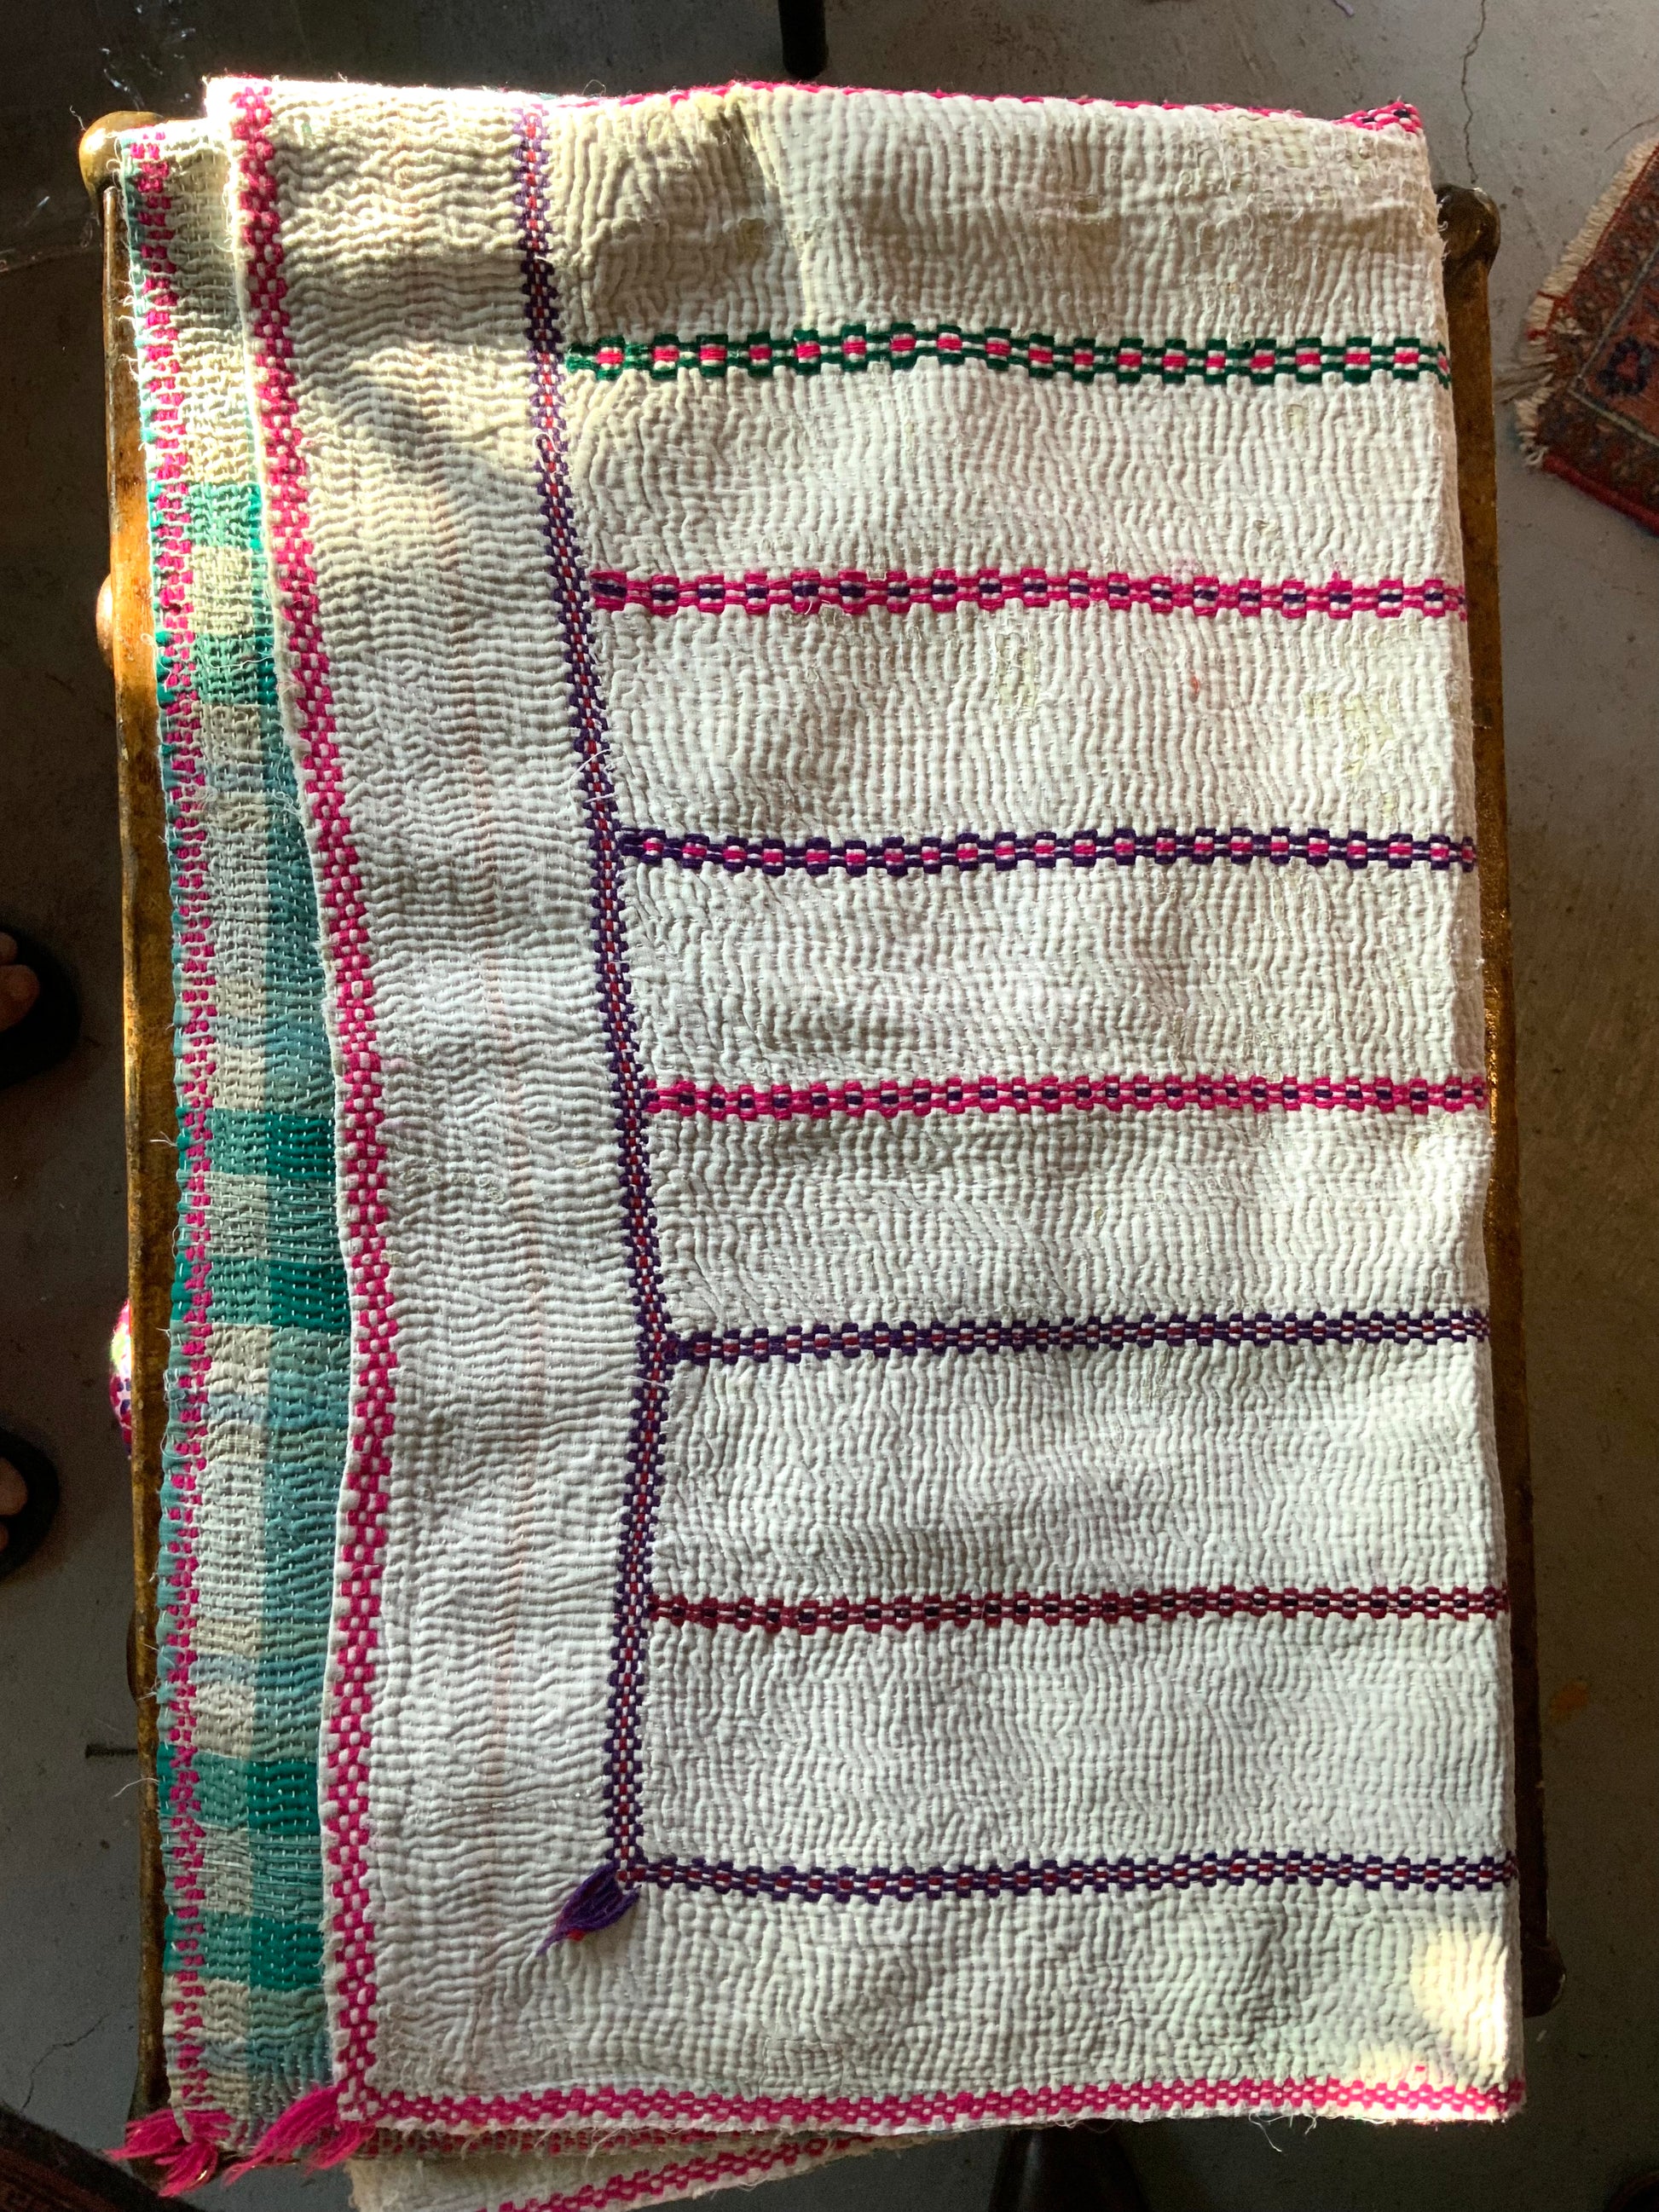 Spectacularly textured white kantha blanket with the perfect combination of pink, green, and blue! #vintagestyle #KanthaBlanket - DharBazaar